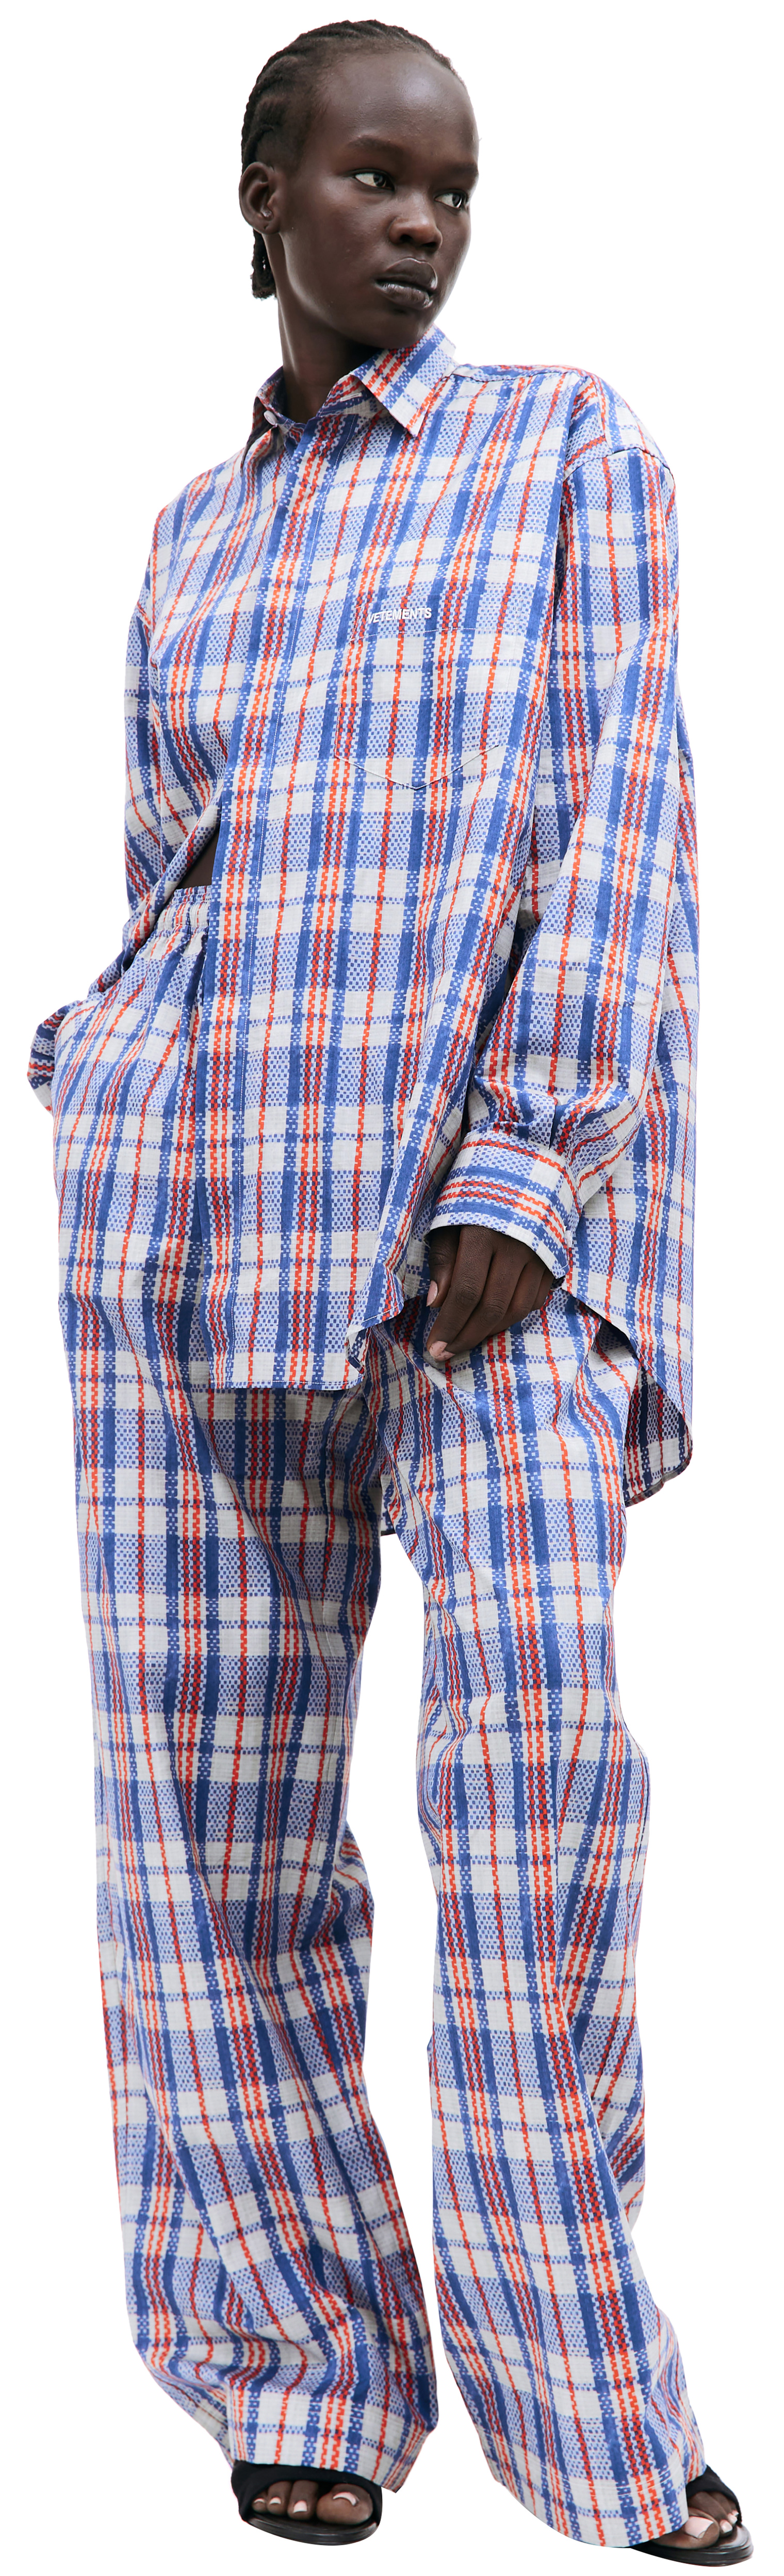 VETEMENTS Checked trousers